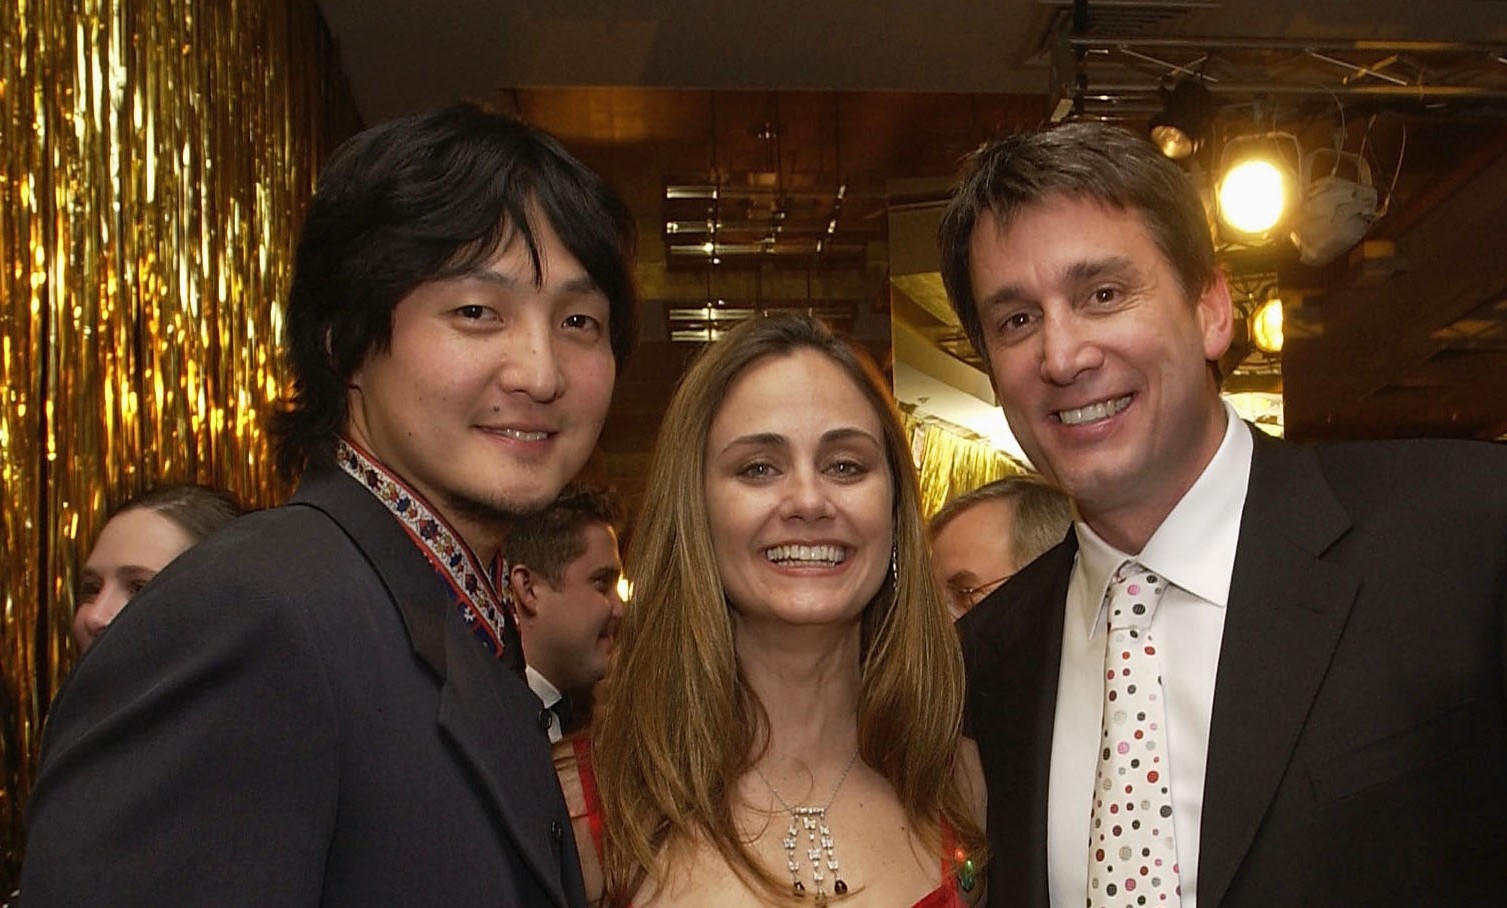 Seung Chung, Diane Farr and Cam Neely attend the Cam Neely Foundation For Cancer Celebrity Fundraiser at The Charles Hotel, February 26, 2005, in Cambridge, Massachusetts. | Source: Getty Images